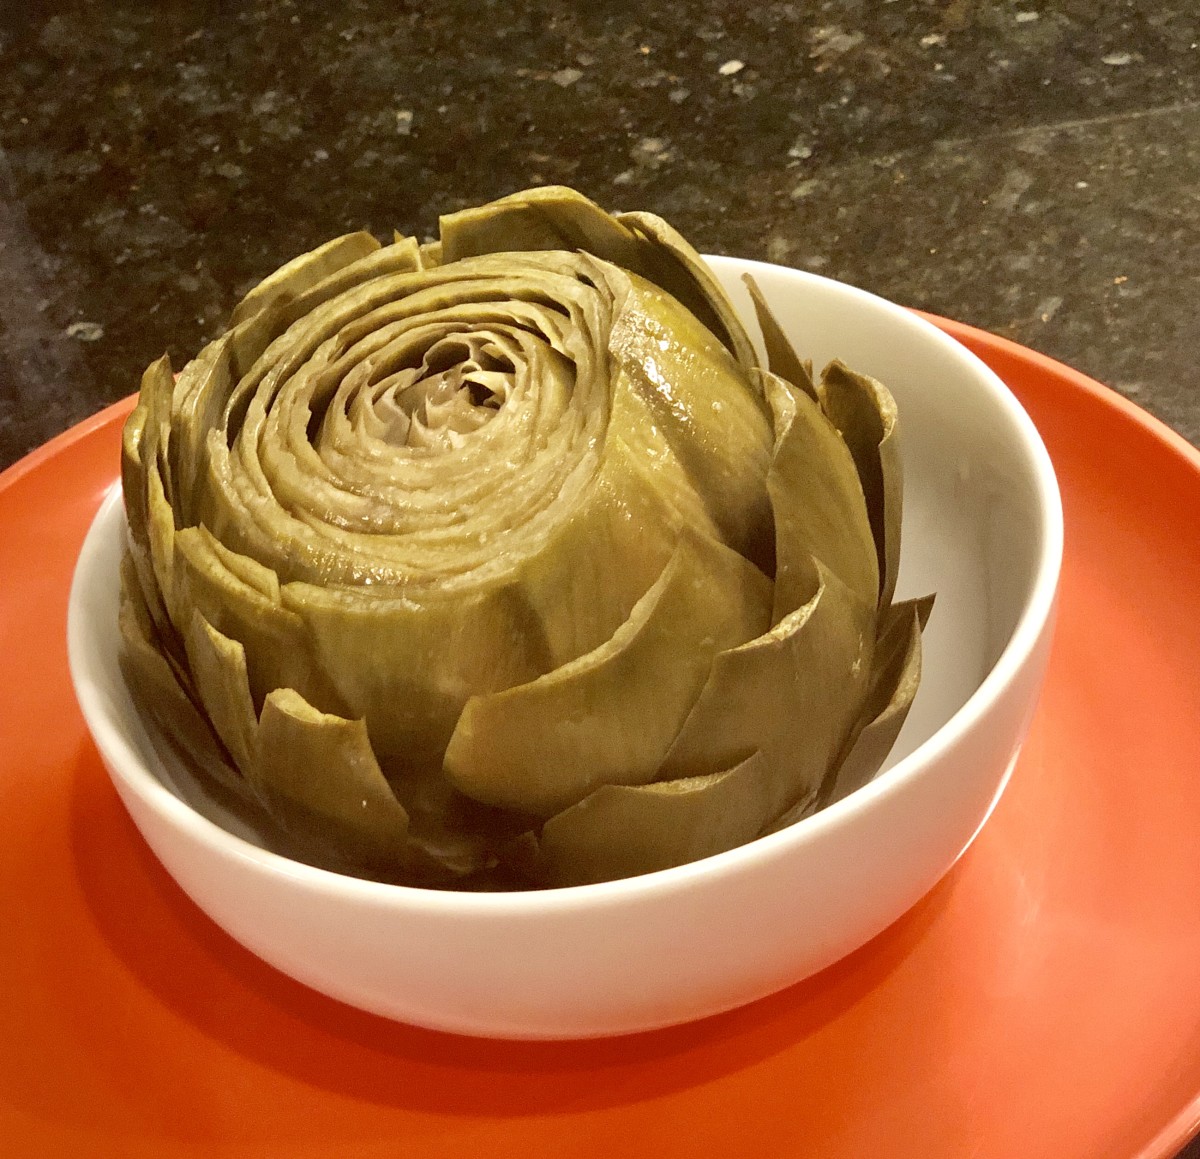 This artichoke is ready for dinner!